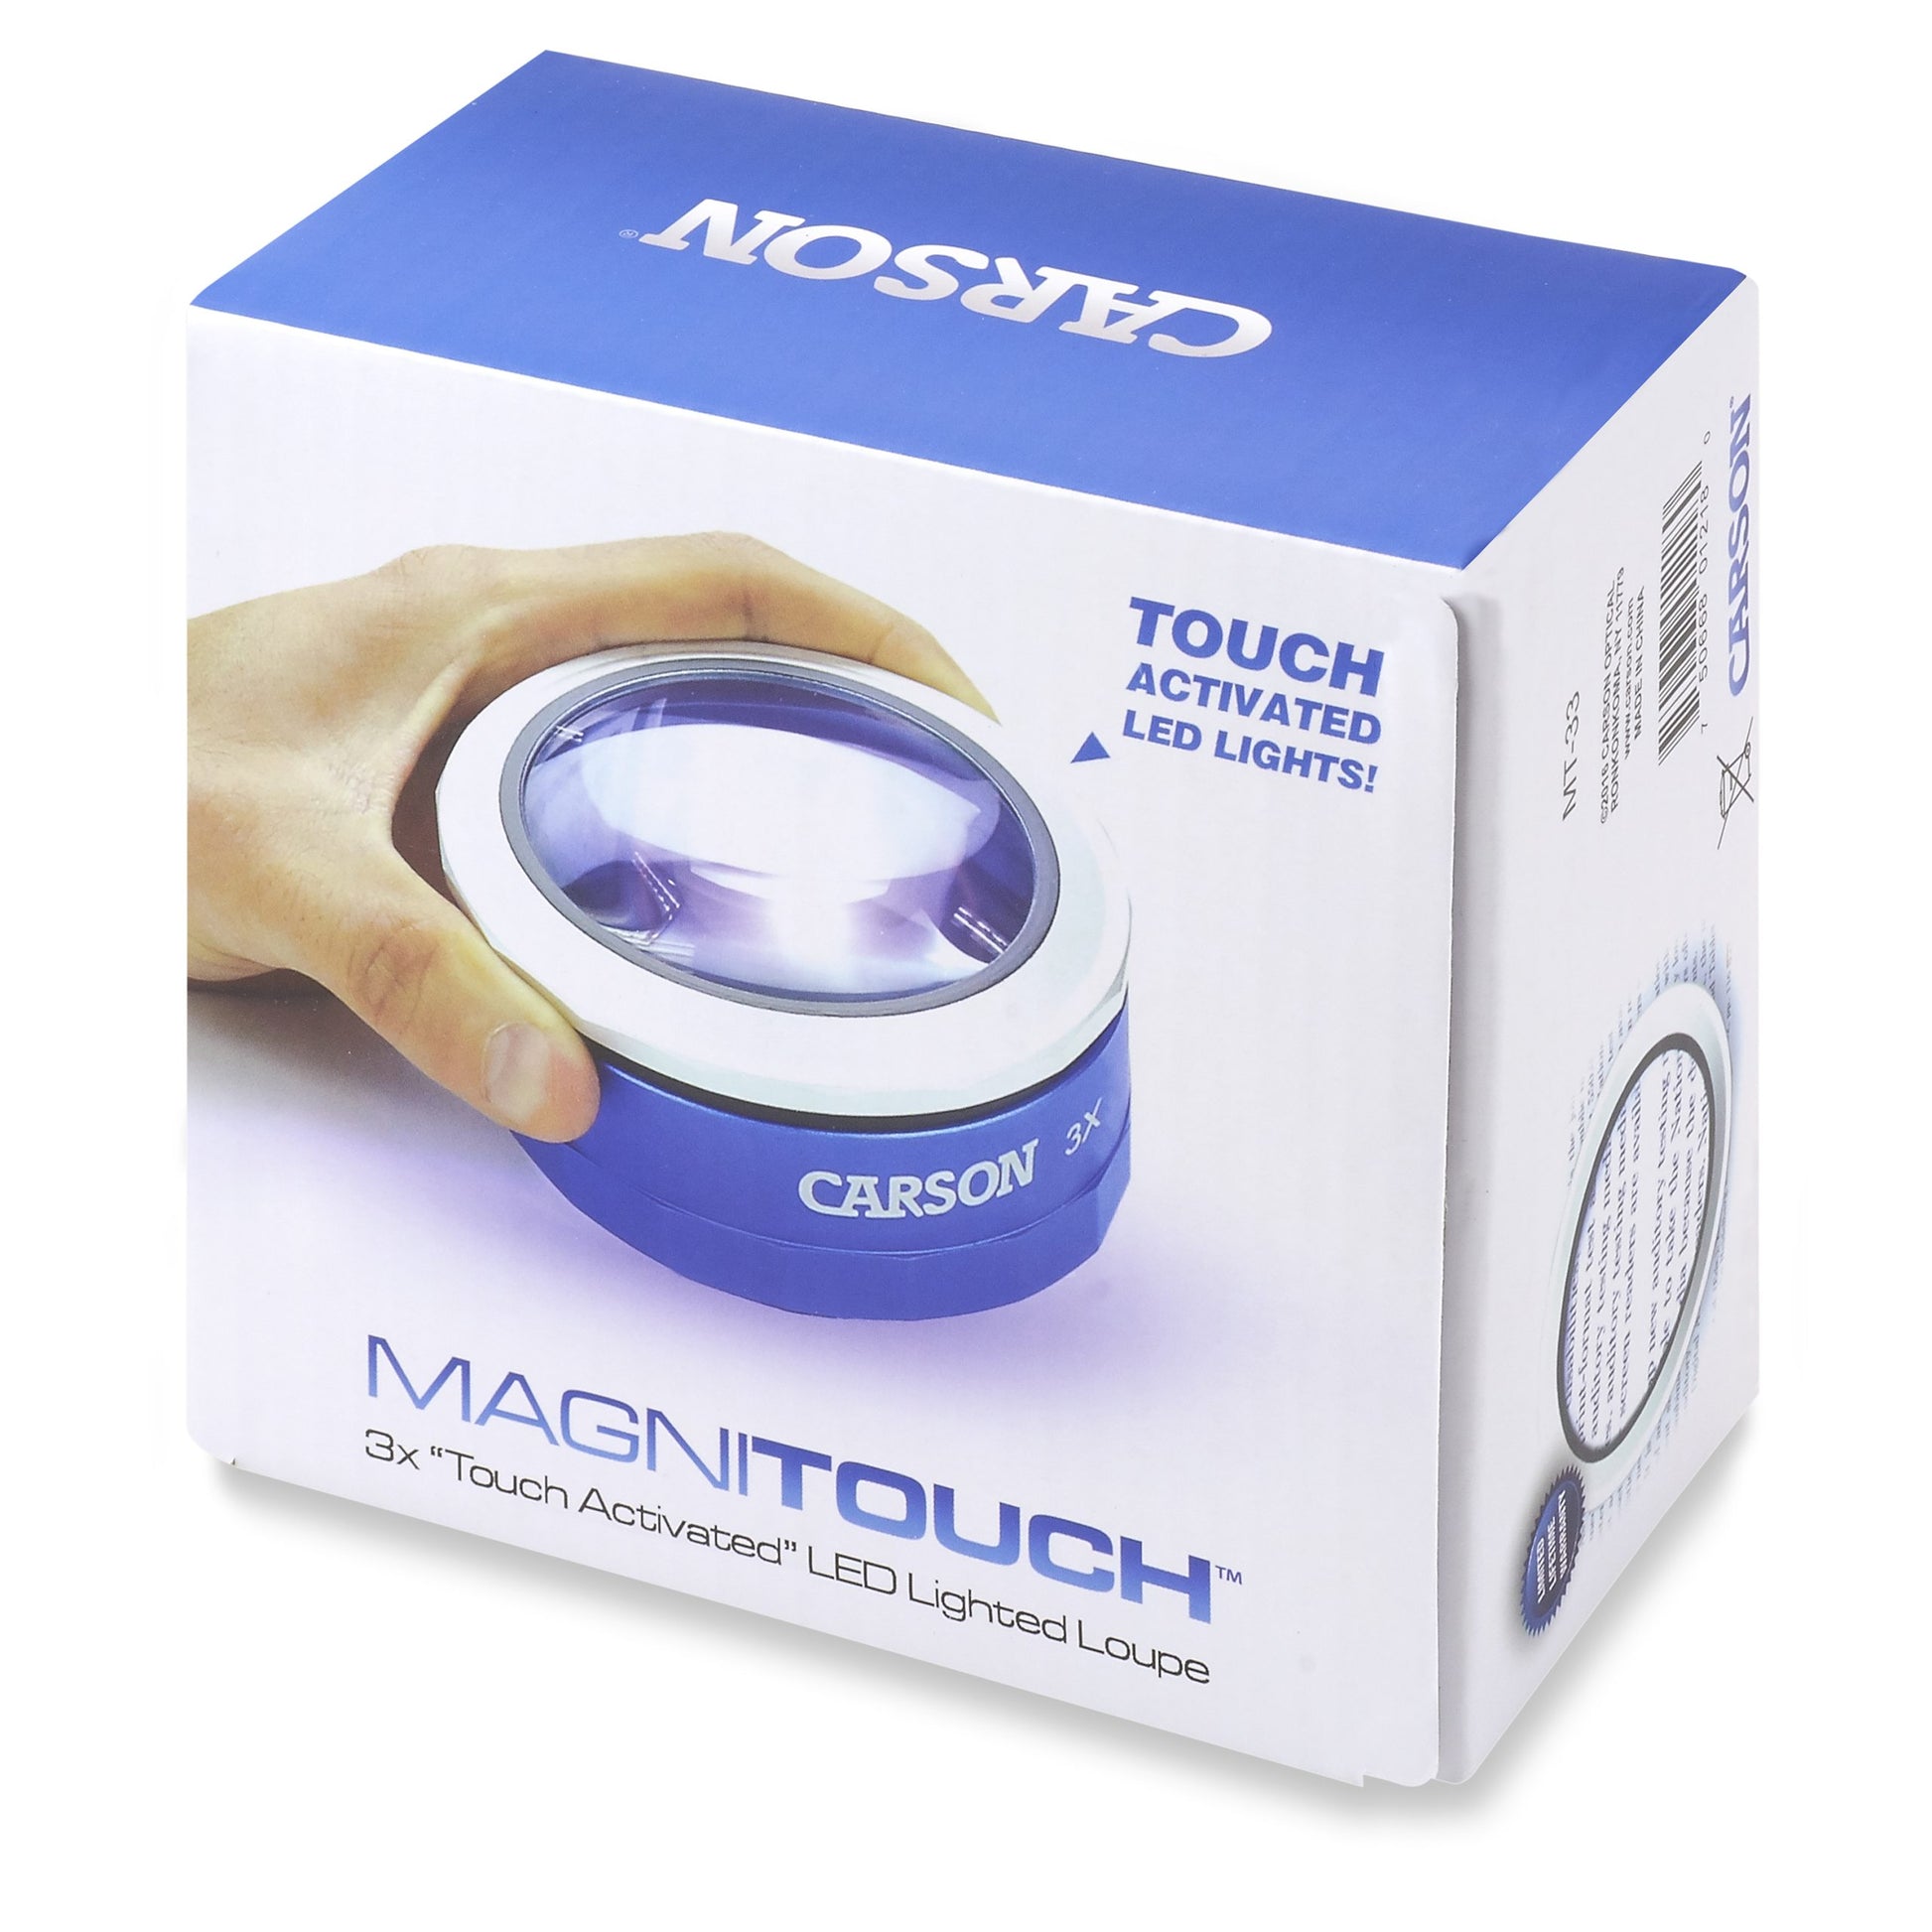 Carson Magnitouch 3x Power Touch